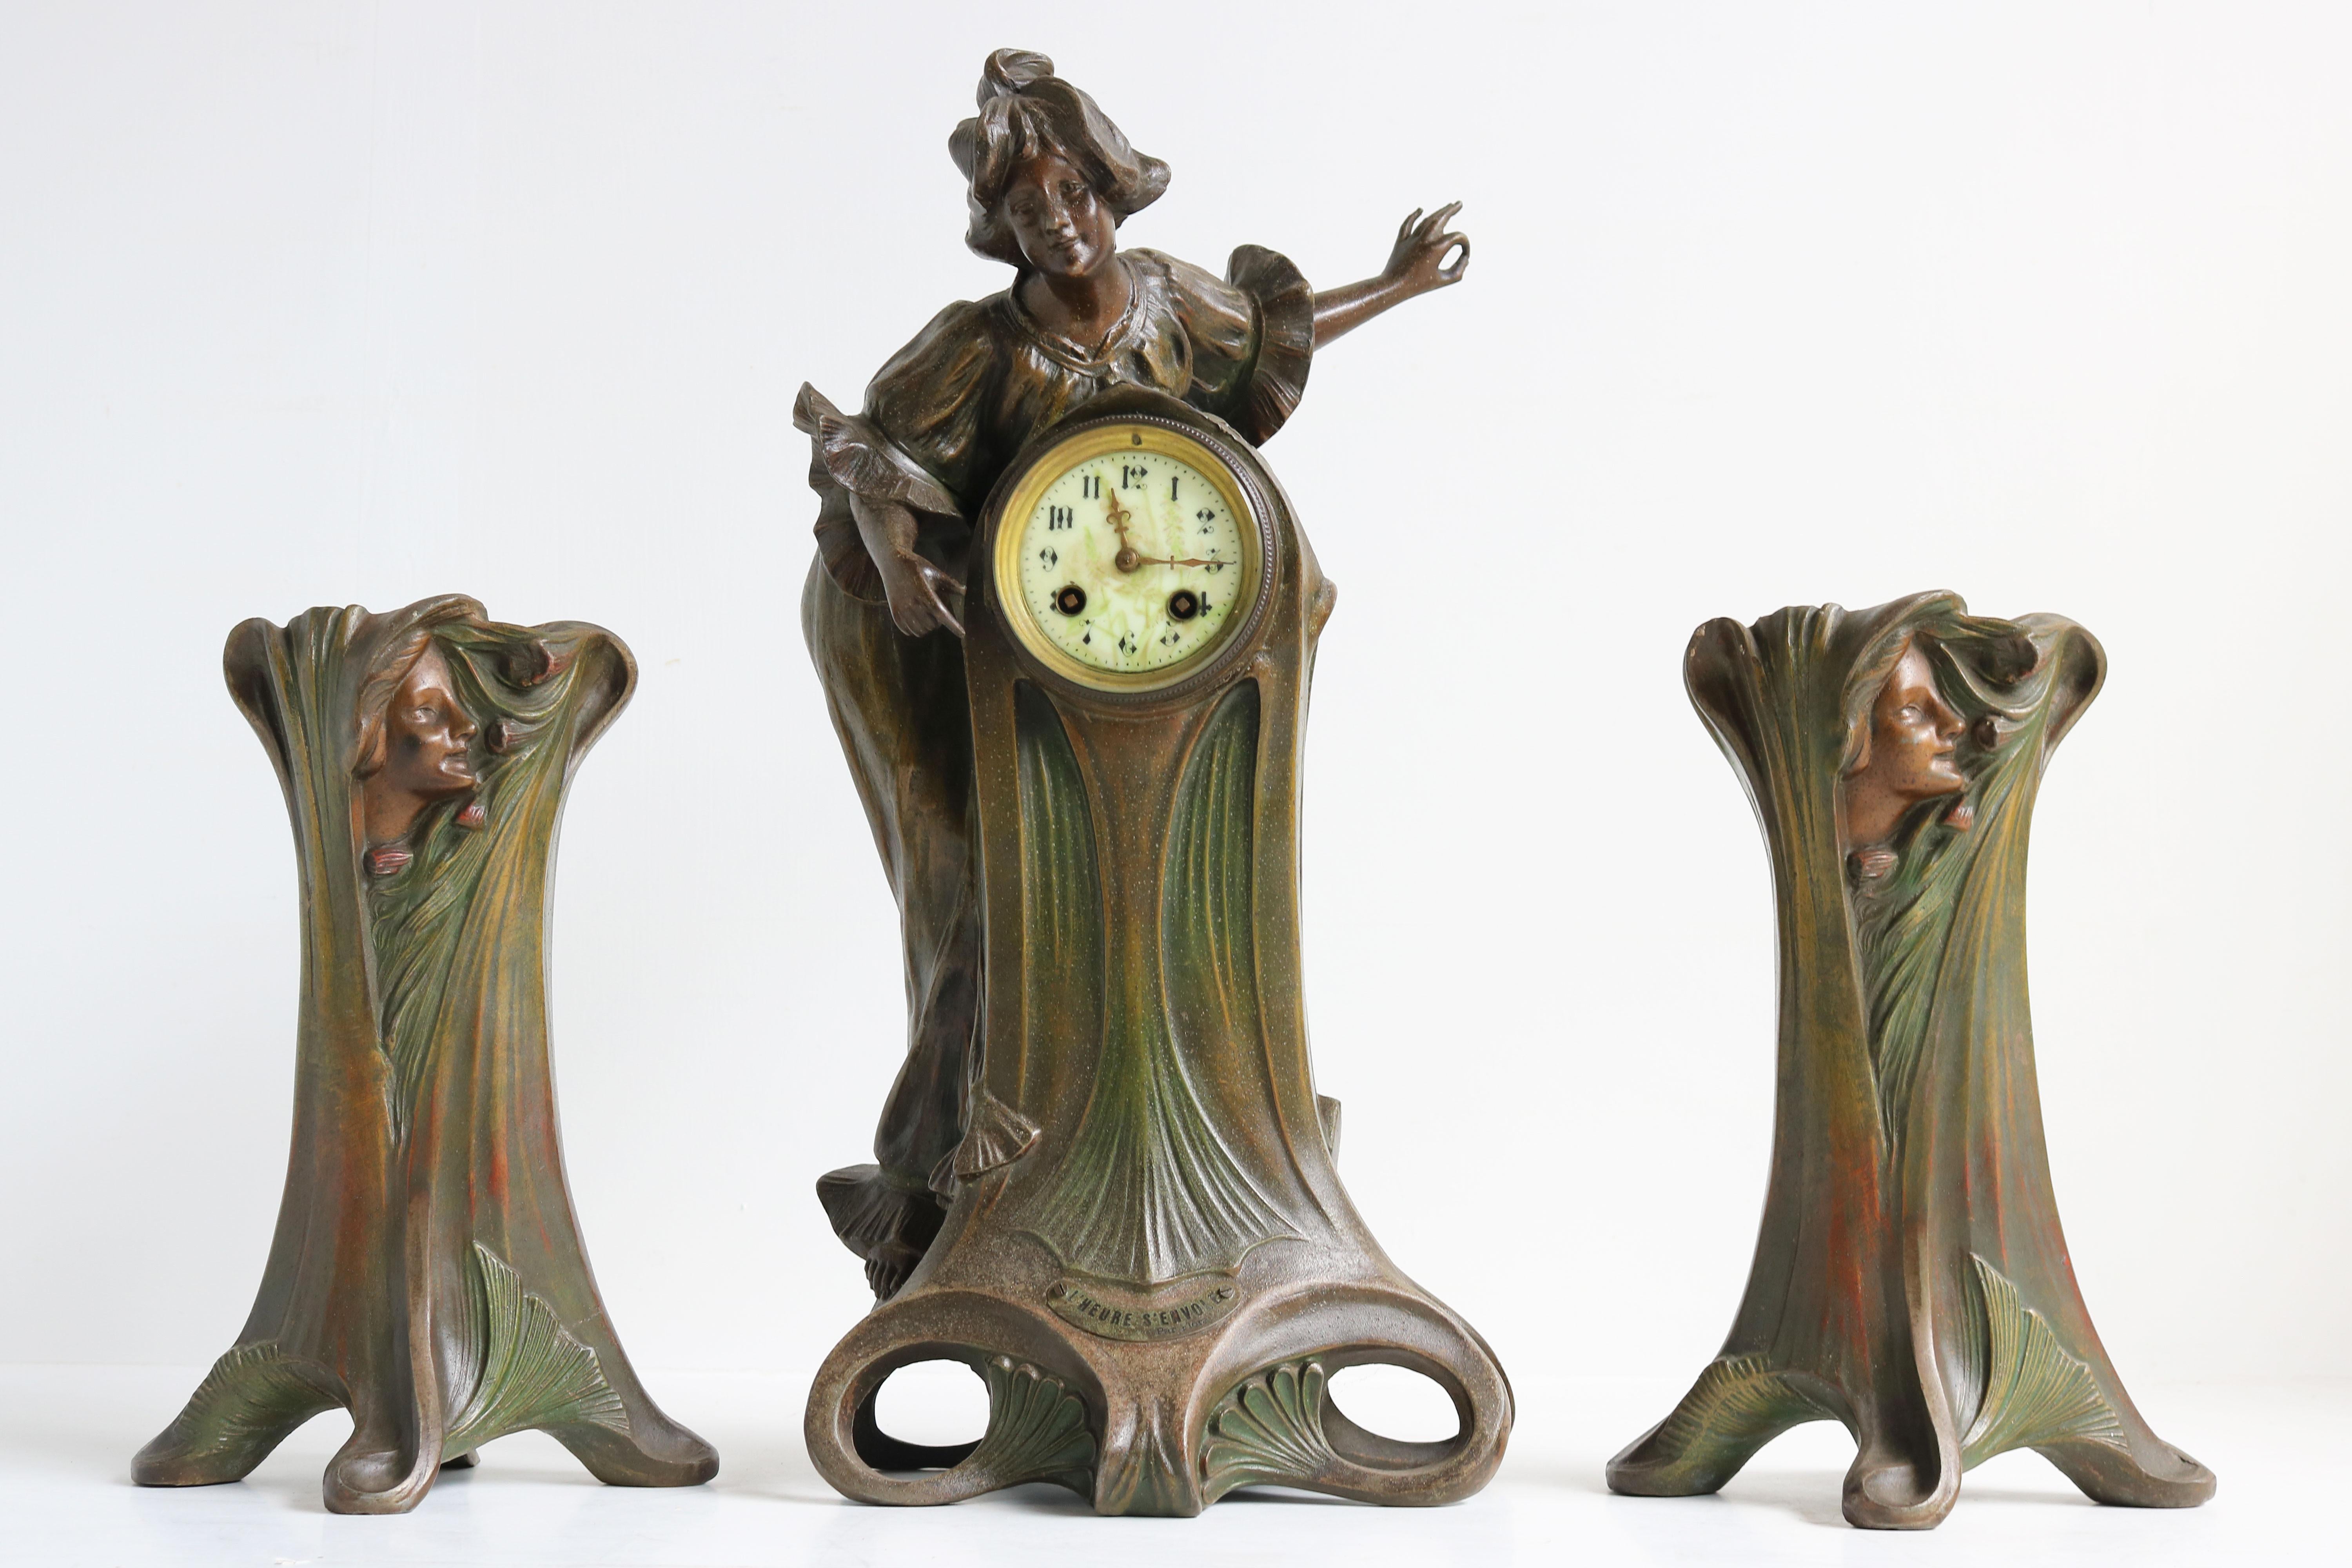 Gorgeous Art Nouveau clock set from the 1890s by Italian artist Francesco Flora made in Paris France. 
Francesco Flora is known for making gorgeous female Art Nouveau style sculptures and this clock set is a perfect example of that. 
The French